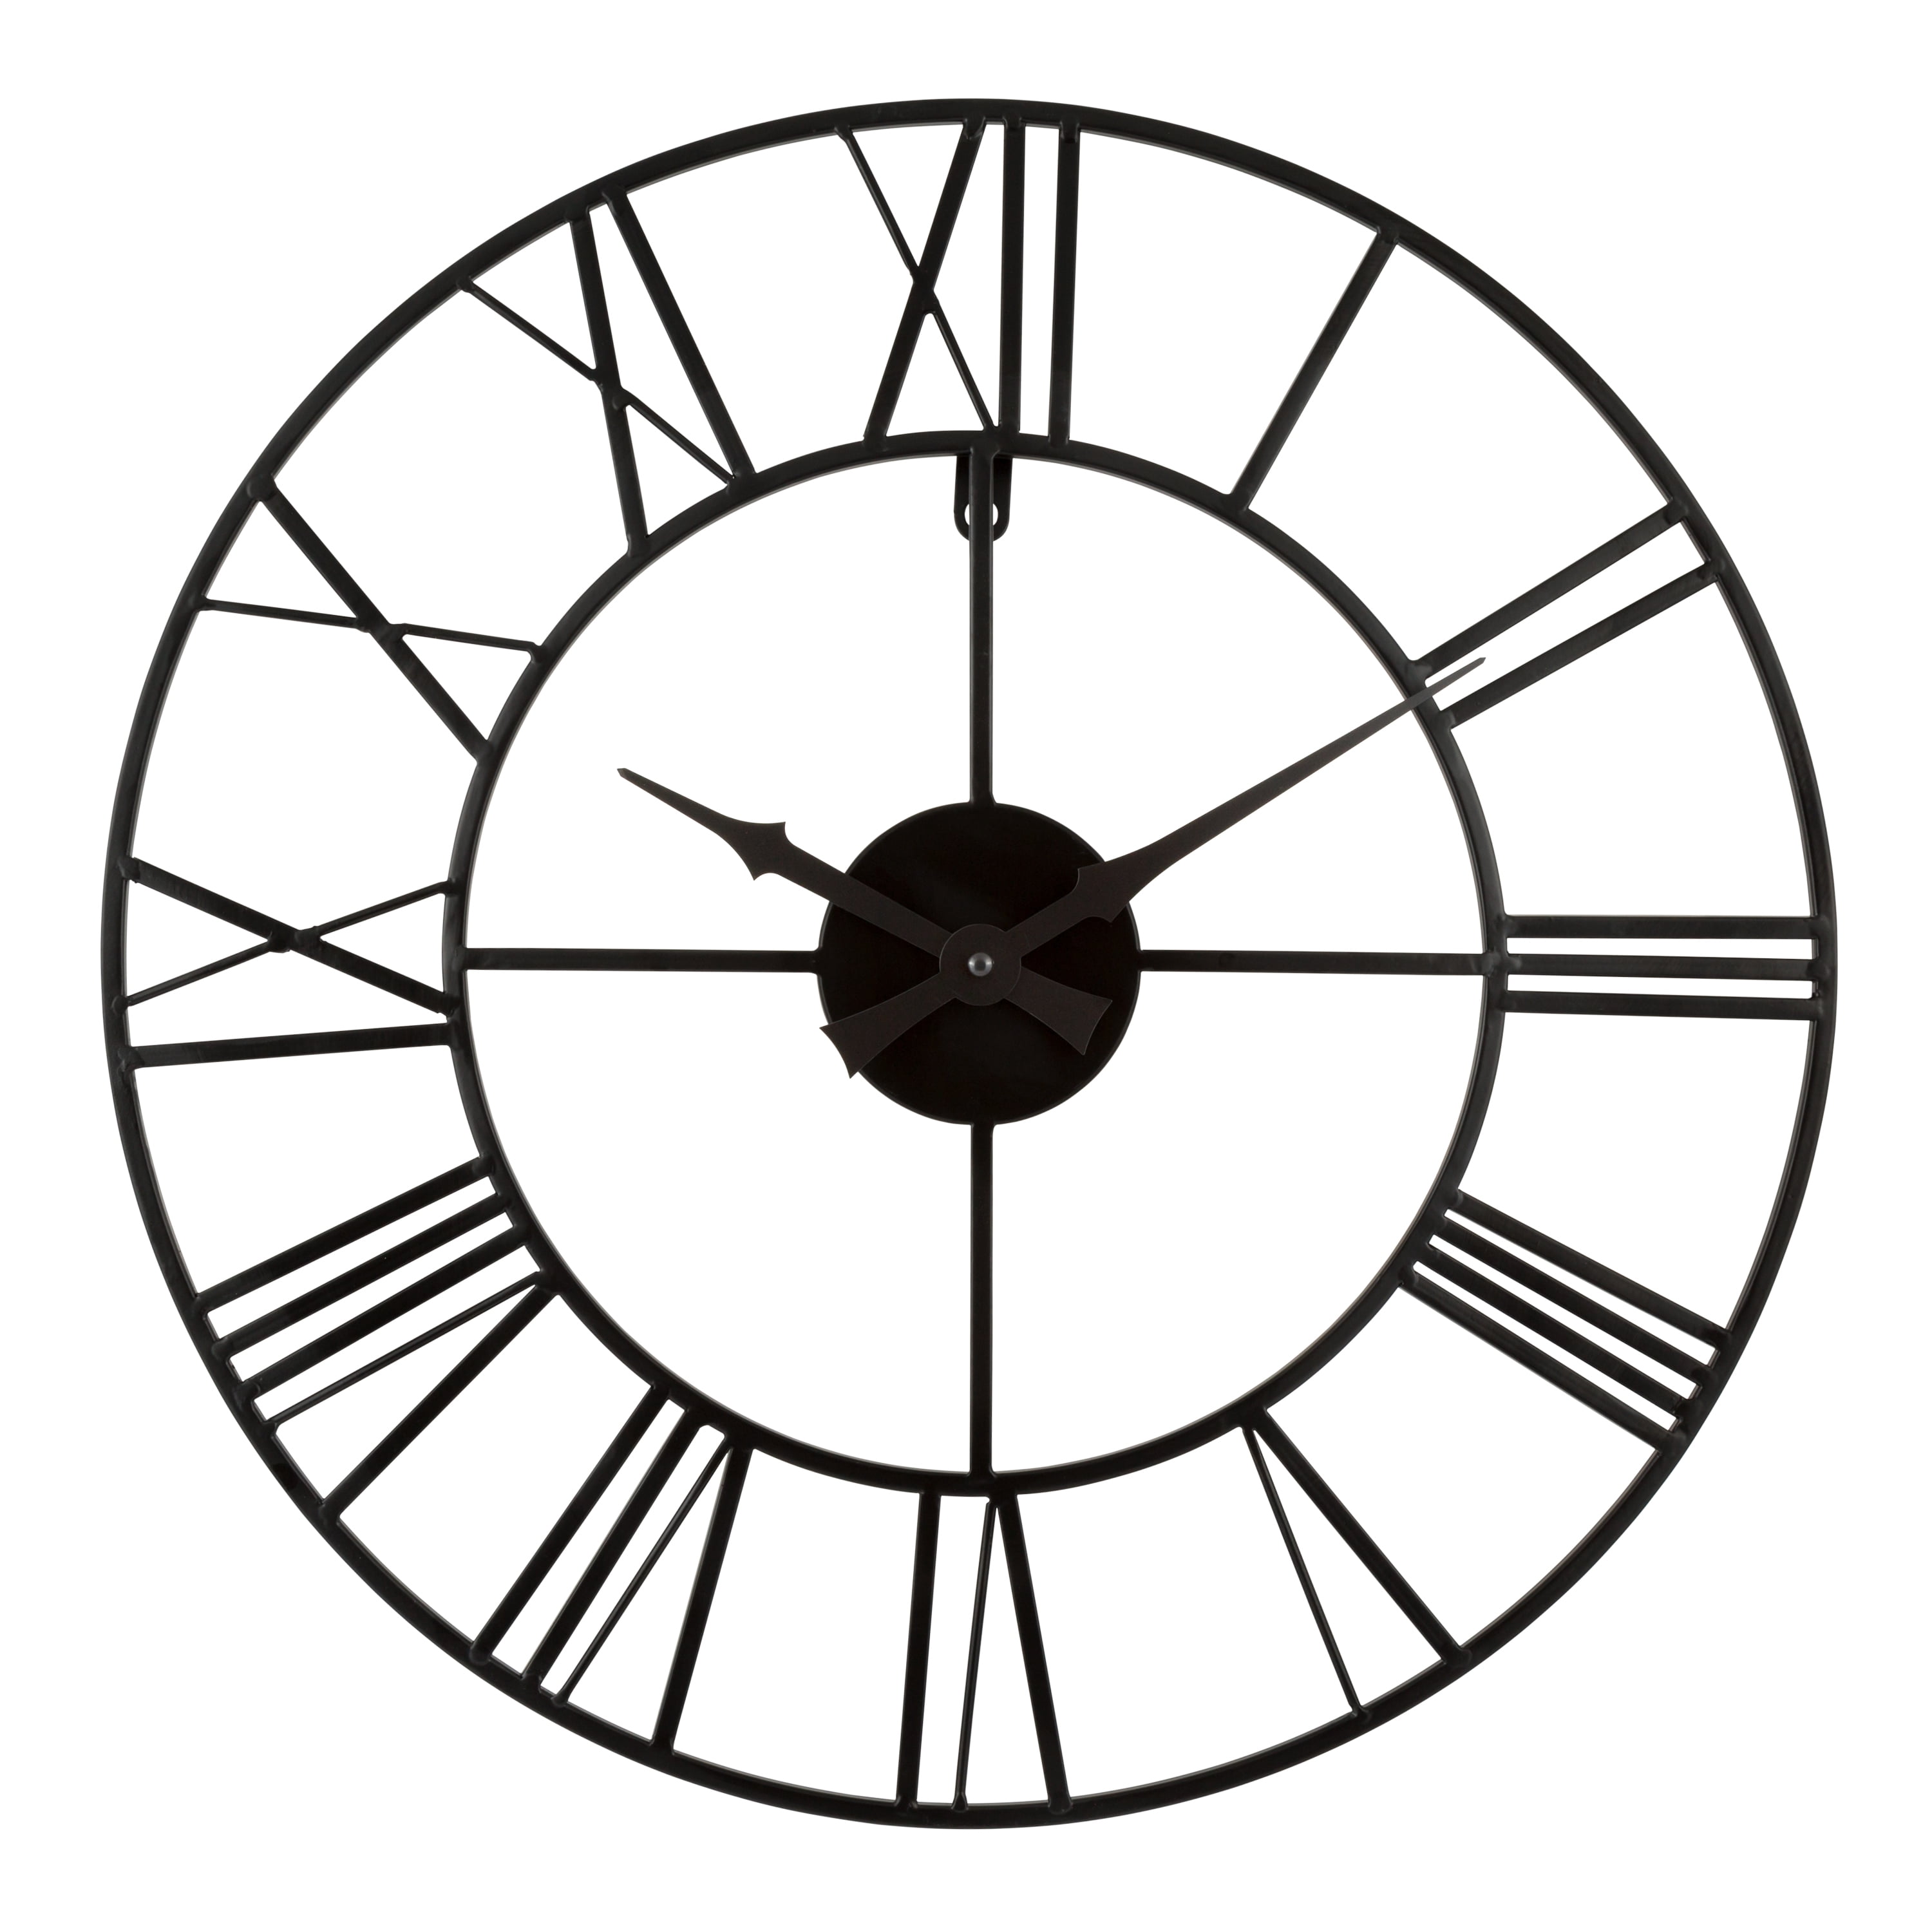 30" Diameter Gray Solange Round Metal Wall Clock High quality Wrought Iron 